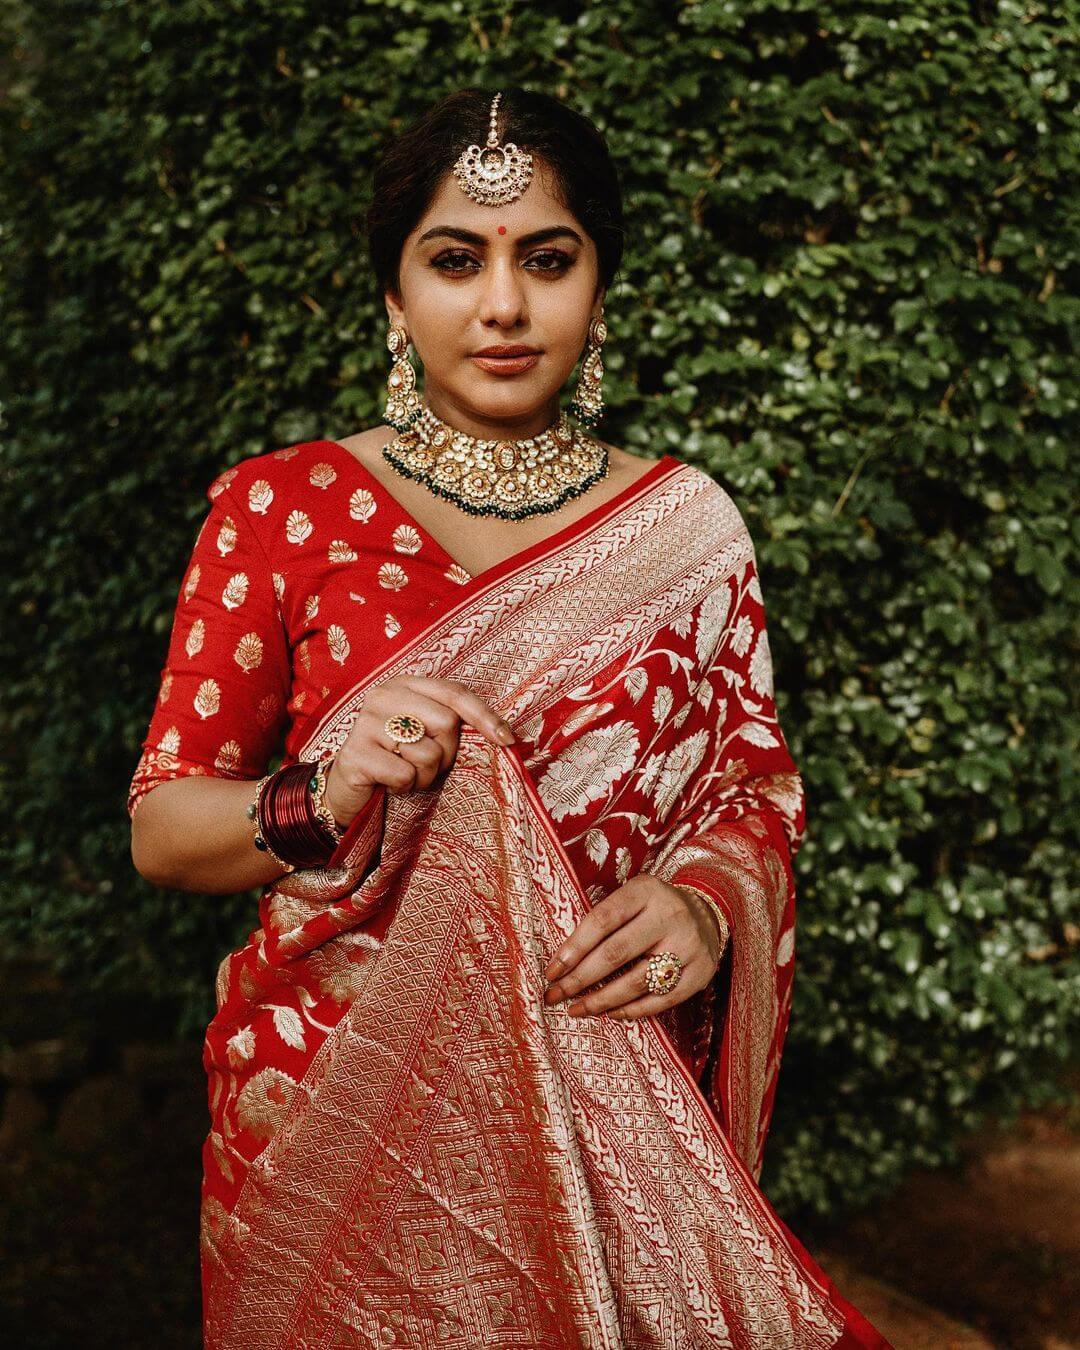 Meera Nandan's New Bridal Look In Red Banarasi Silk Saree Can Be Your Inspo Glamorous Western & Traditional Outfits & Looks